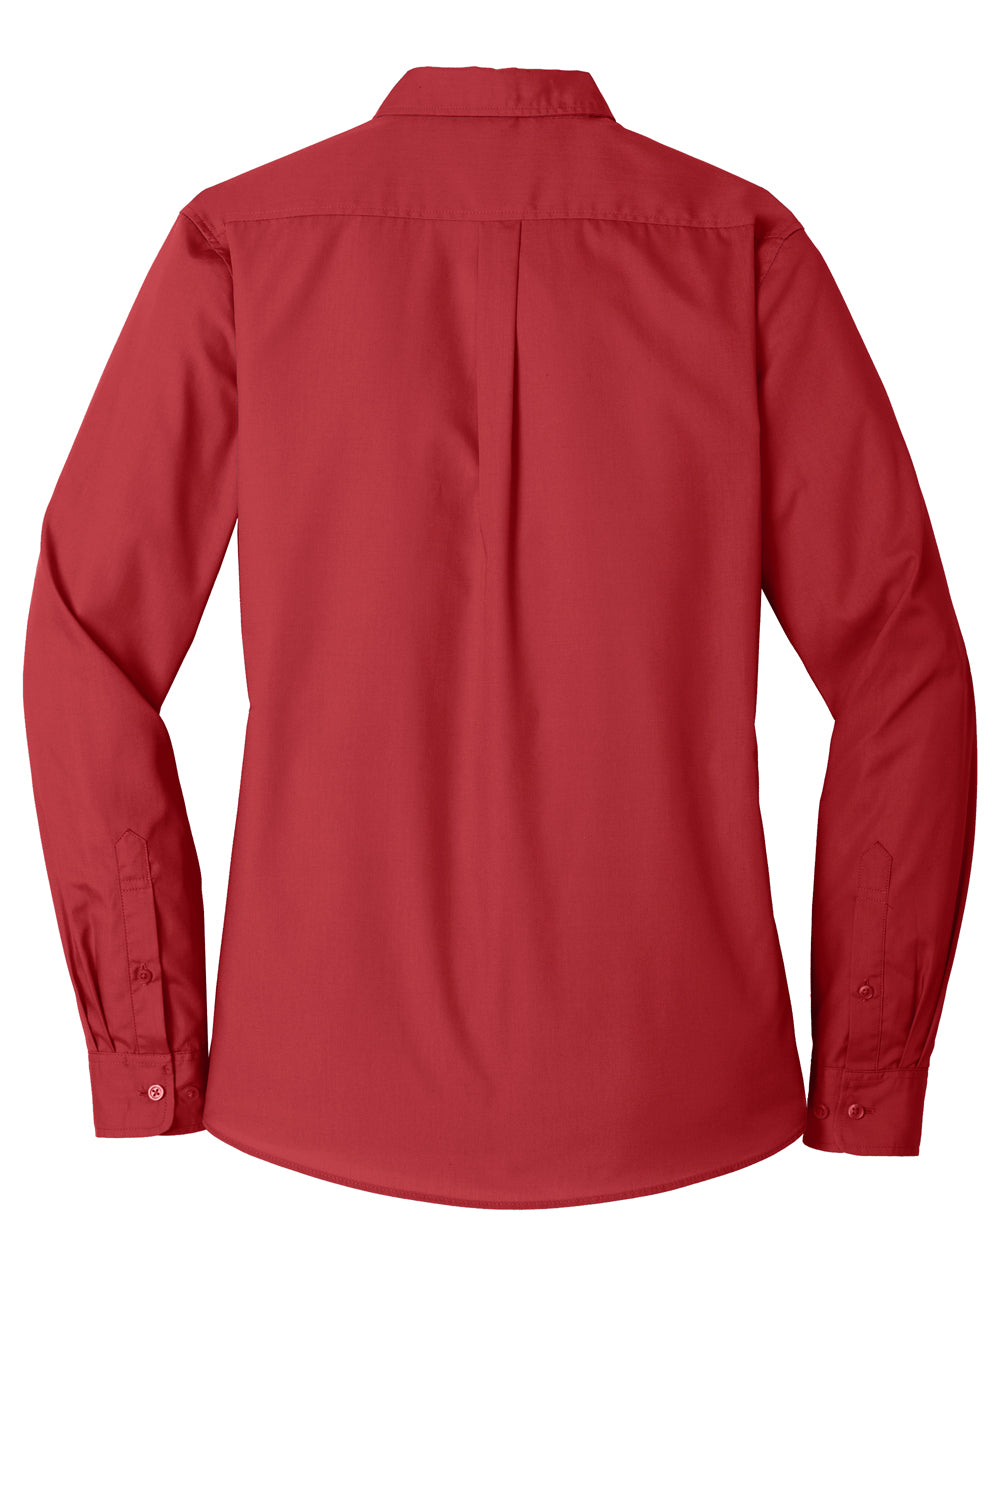 Port Authority LW100 Womens Carefree Stain Resistant Long Sleeve Button Down Shirt Rich Red Flat Back